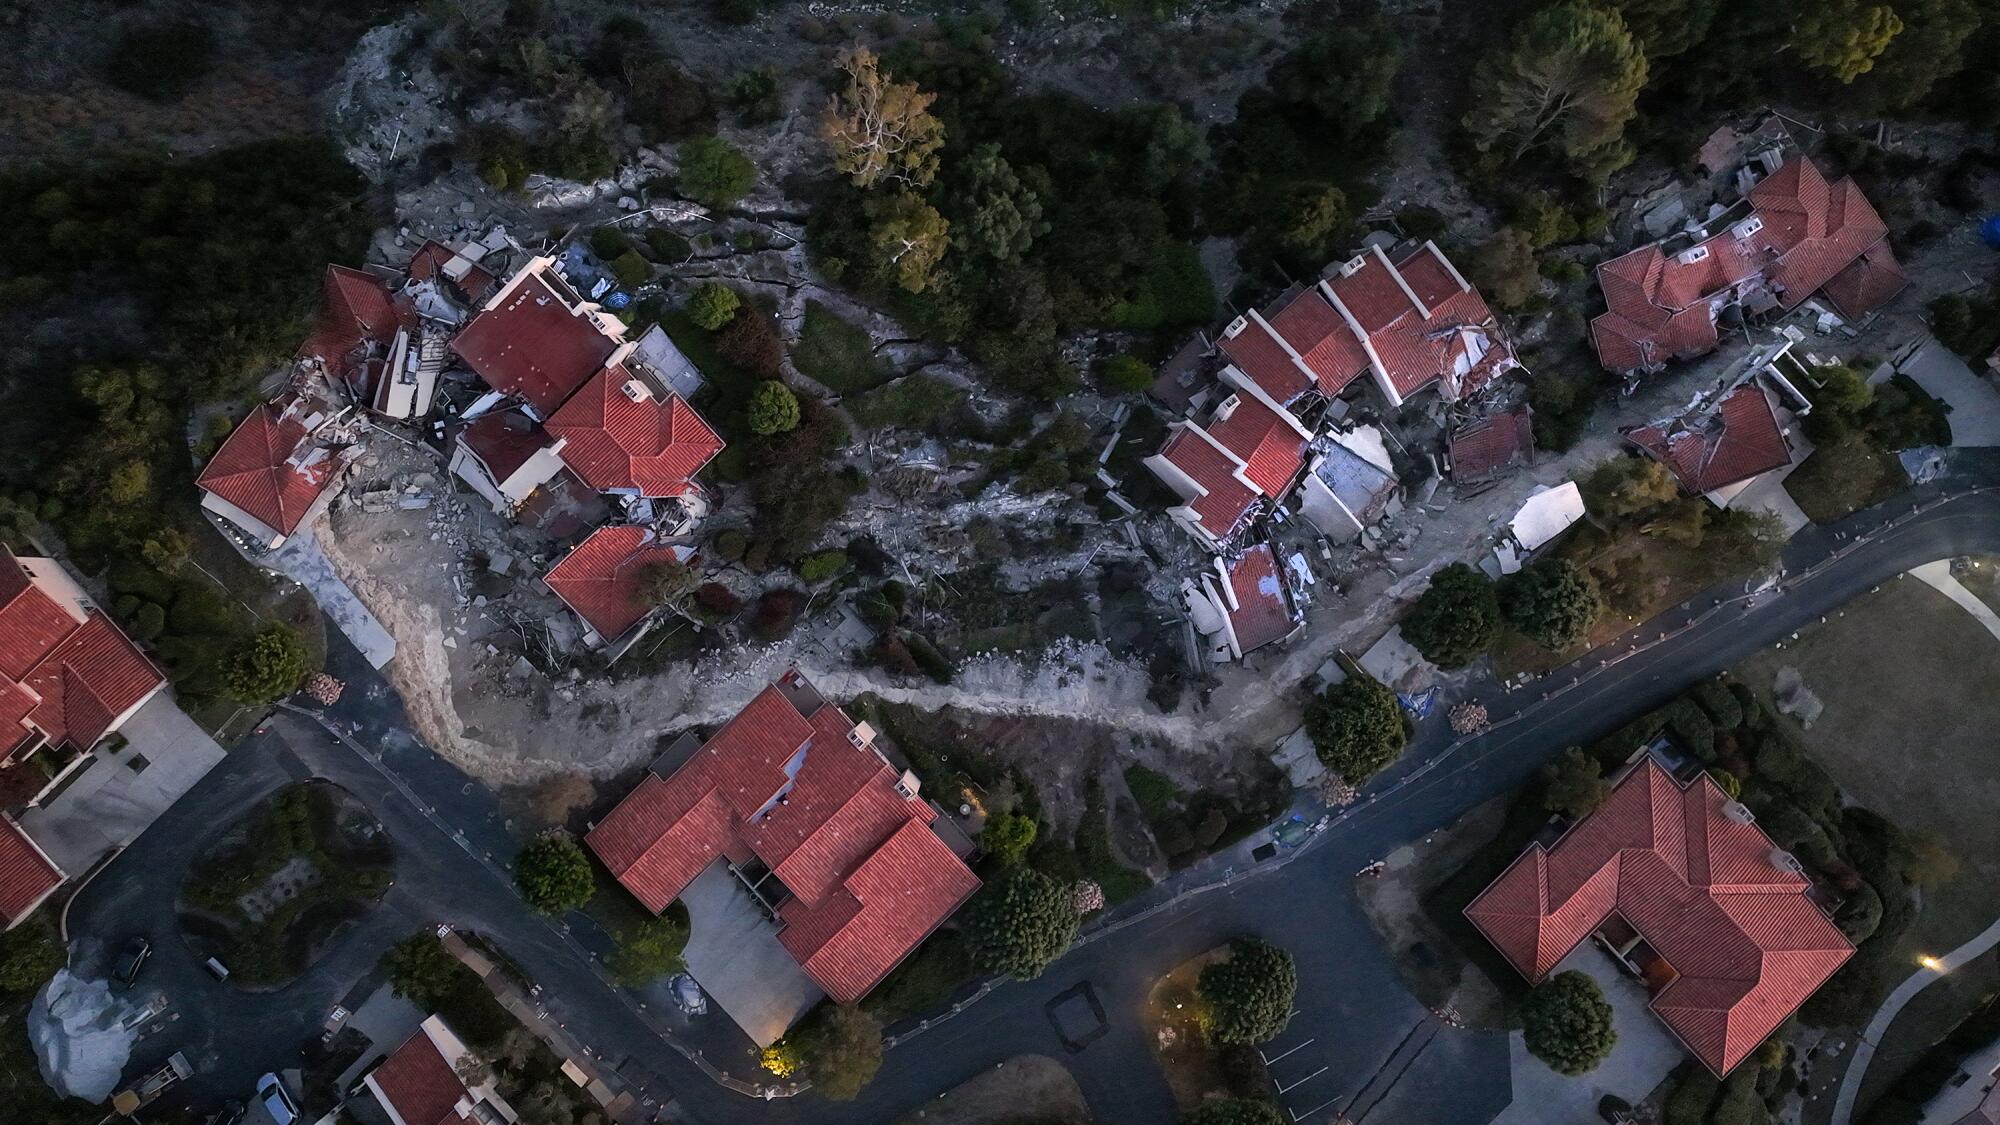 An aerial view shows damaged homes on Peartree Lane in Rolling Hills Estates.